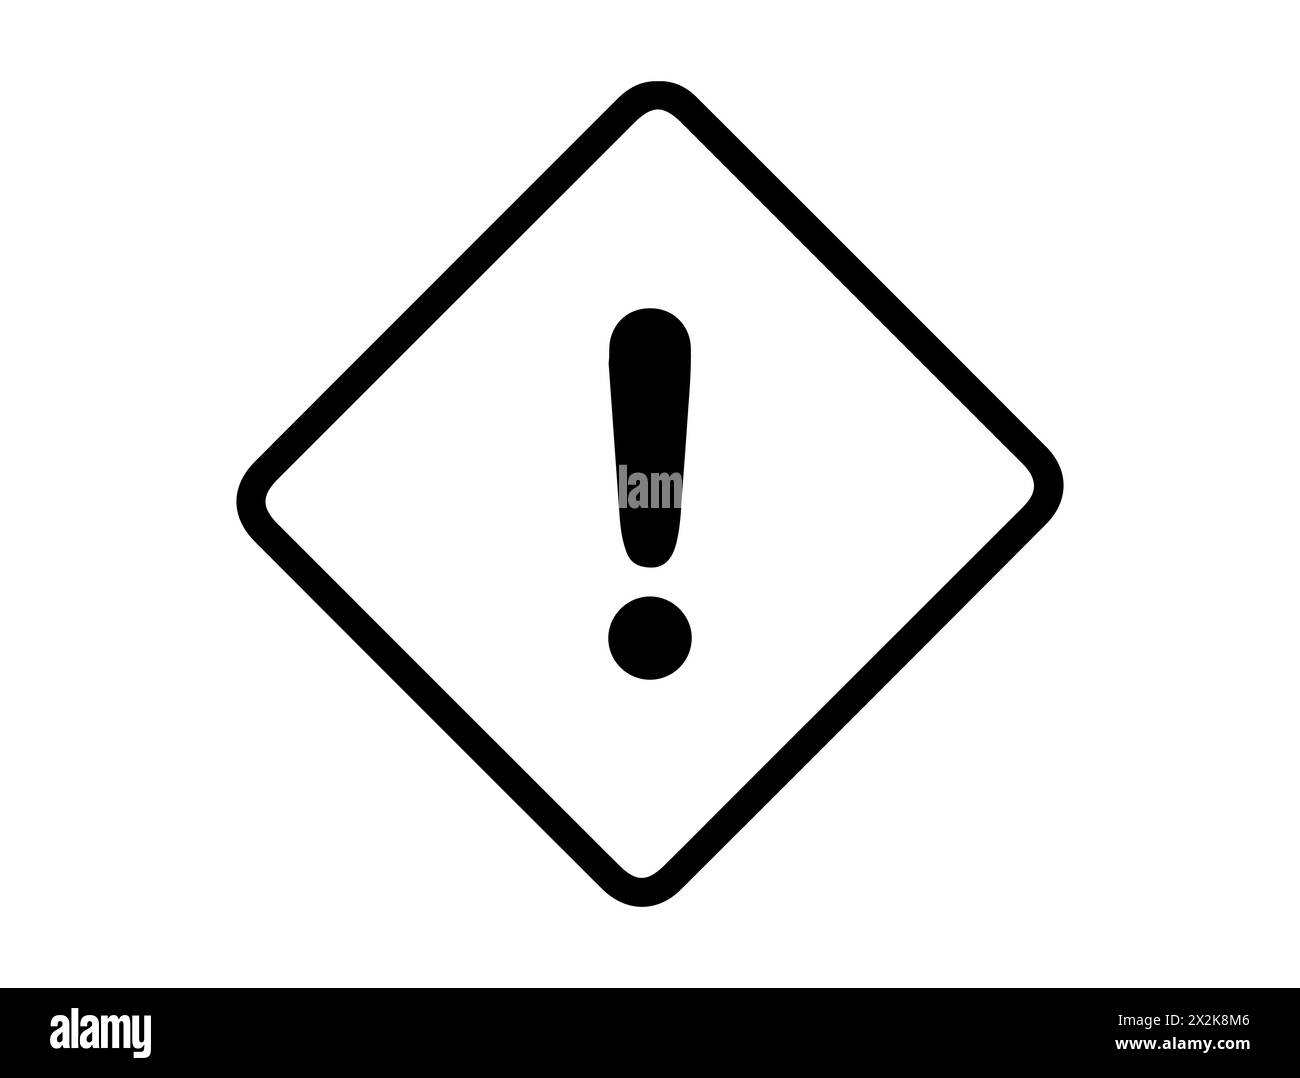 Caution road sign silhouette vector art Stock Vector